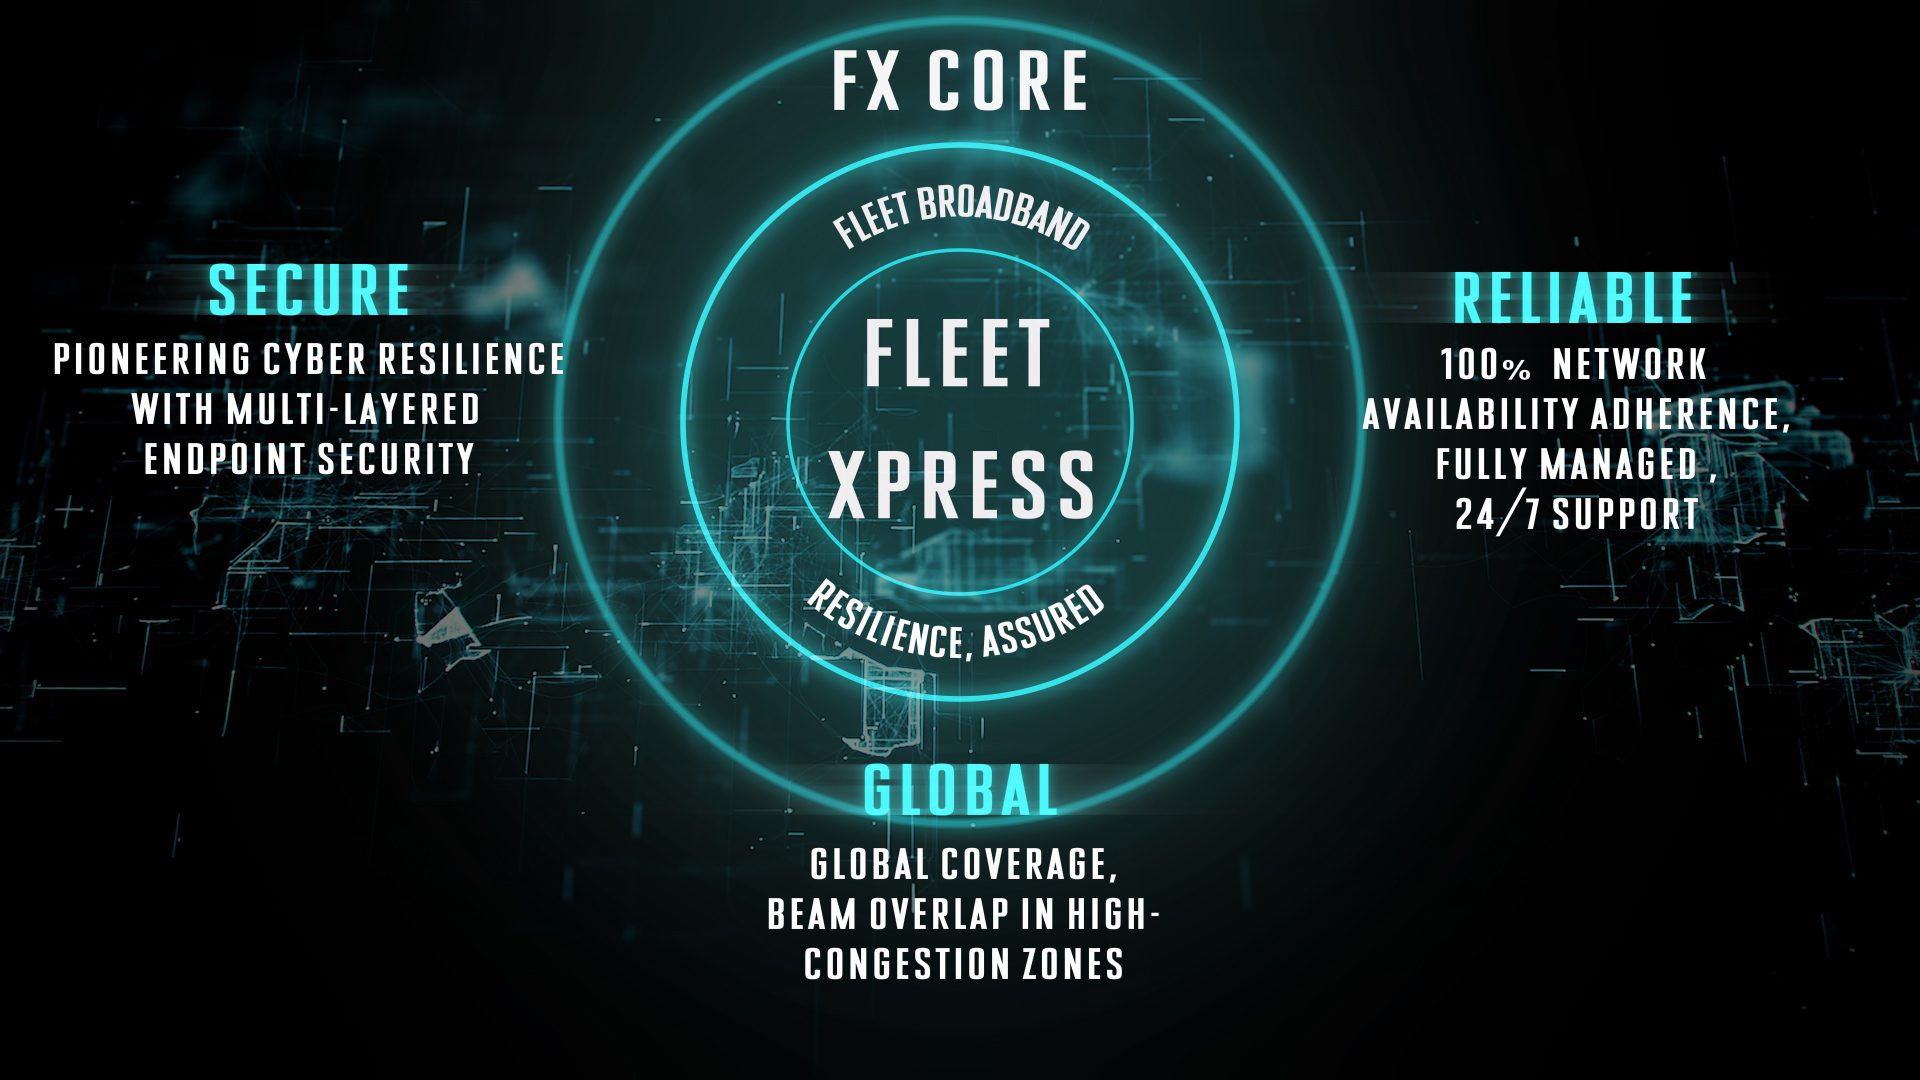 Inmarsat enables digitalisation, decarbonisation, and crew welfare for global shipping with ‘Fleet Xpress Enhanced’